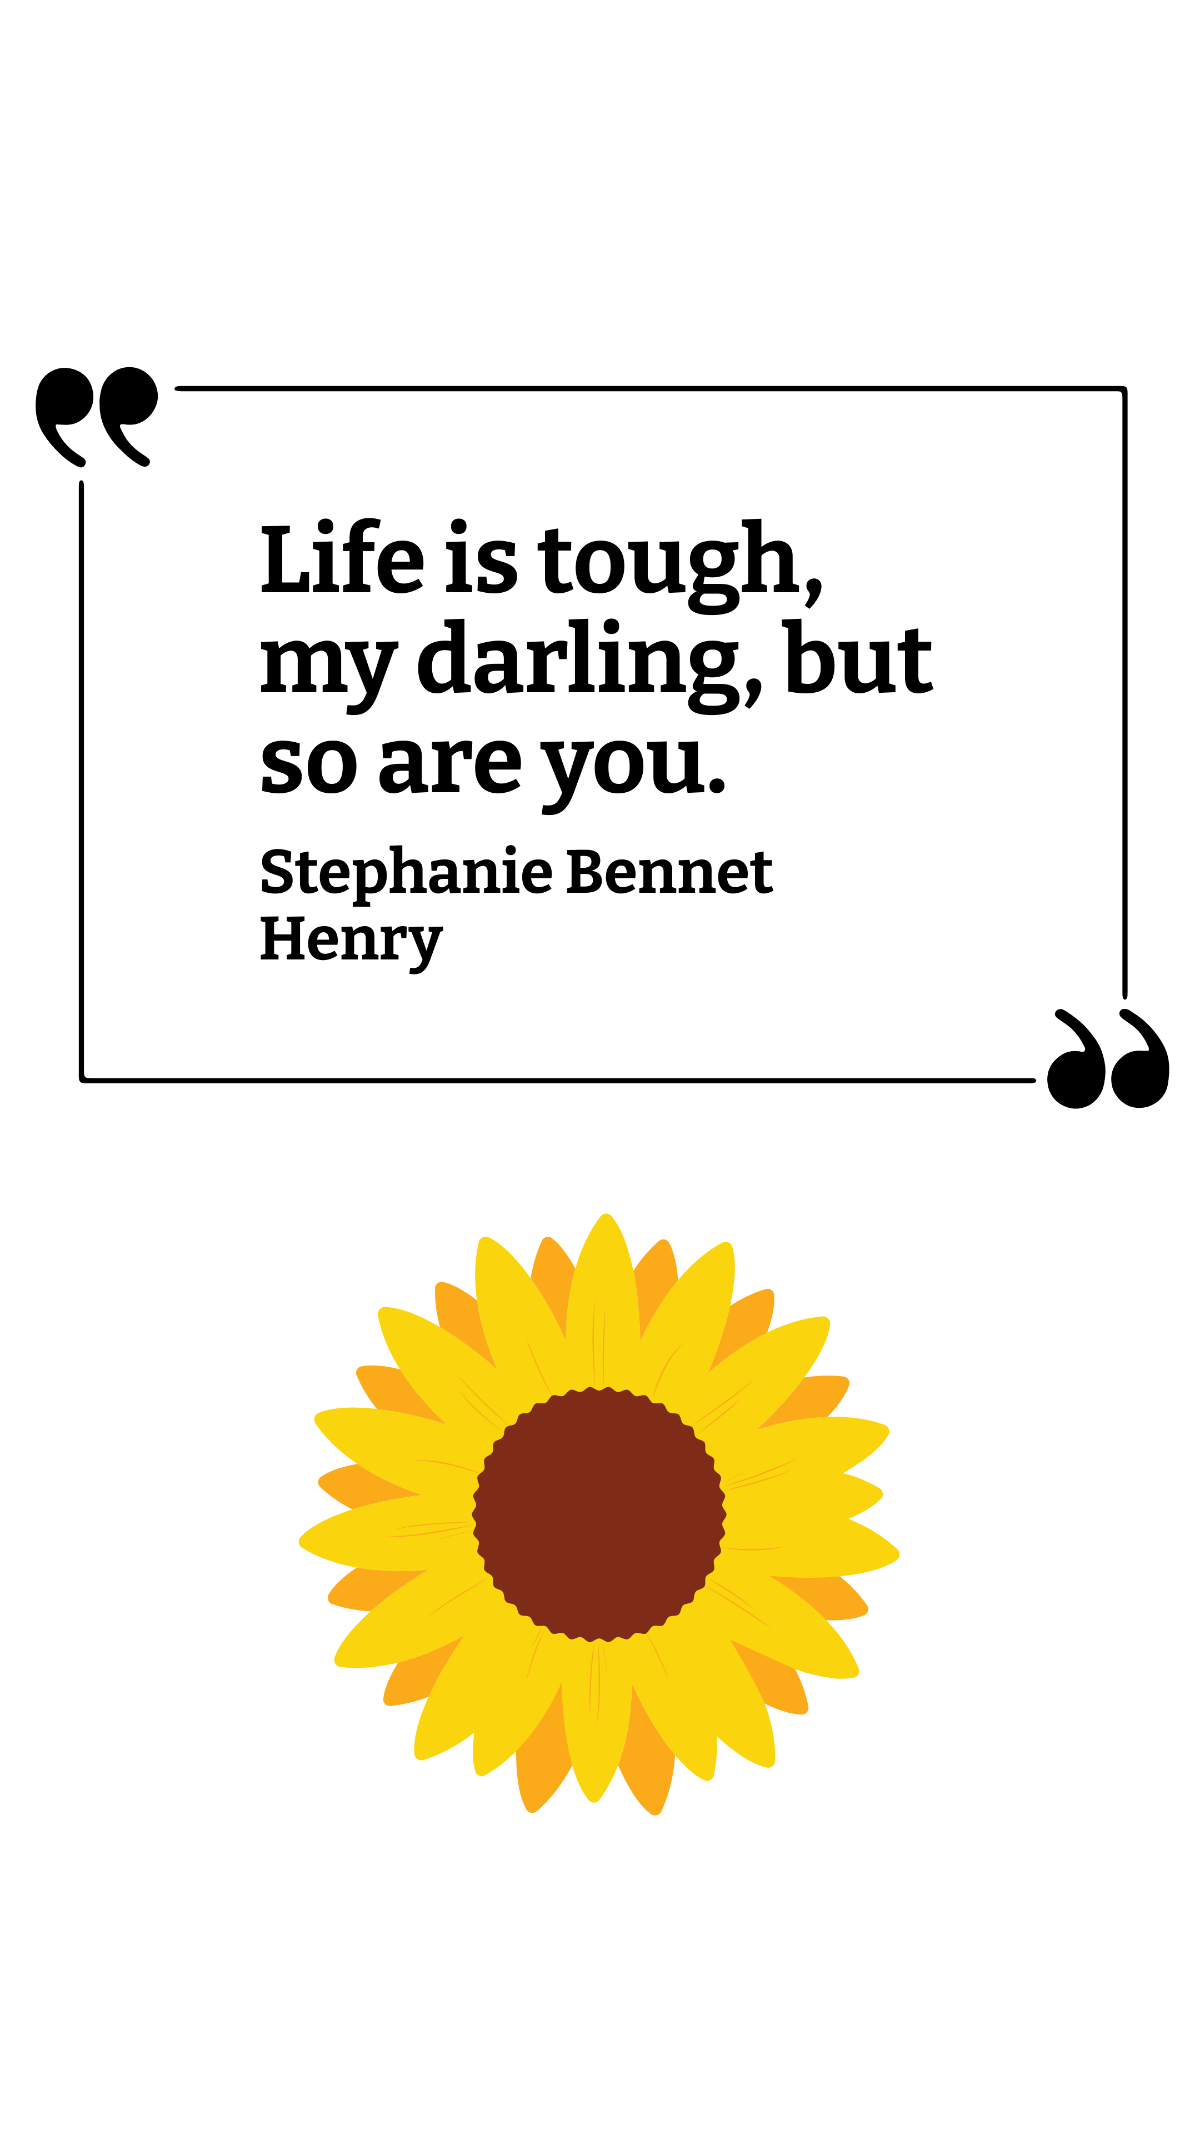 Stephanie Bennet Henry - Life is tough, my darling, but so are you. Template